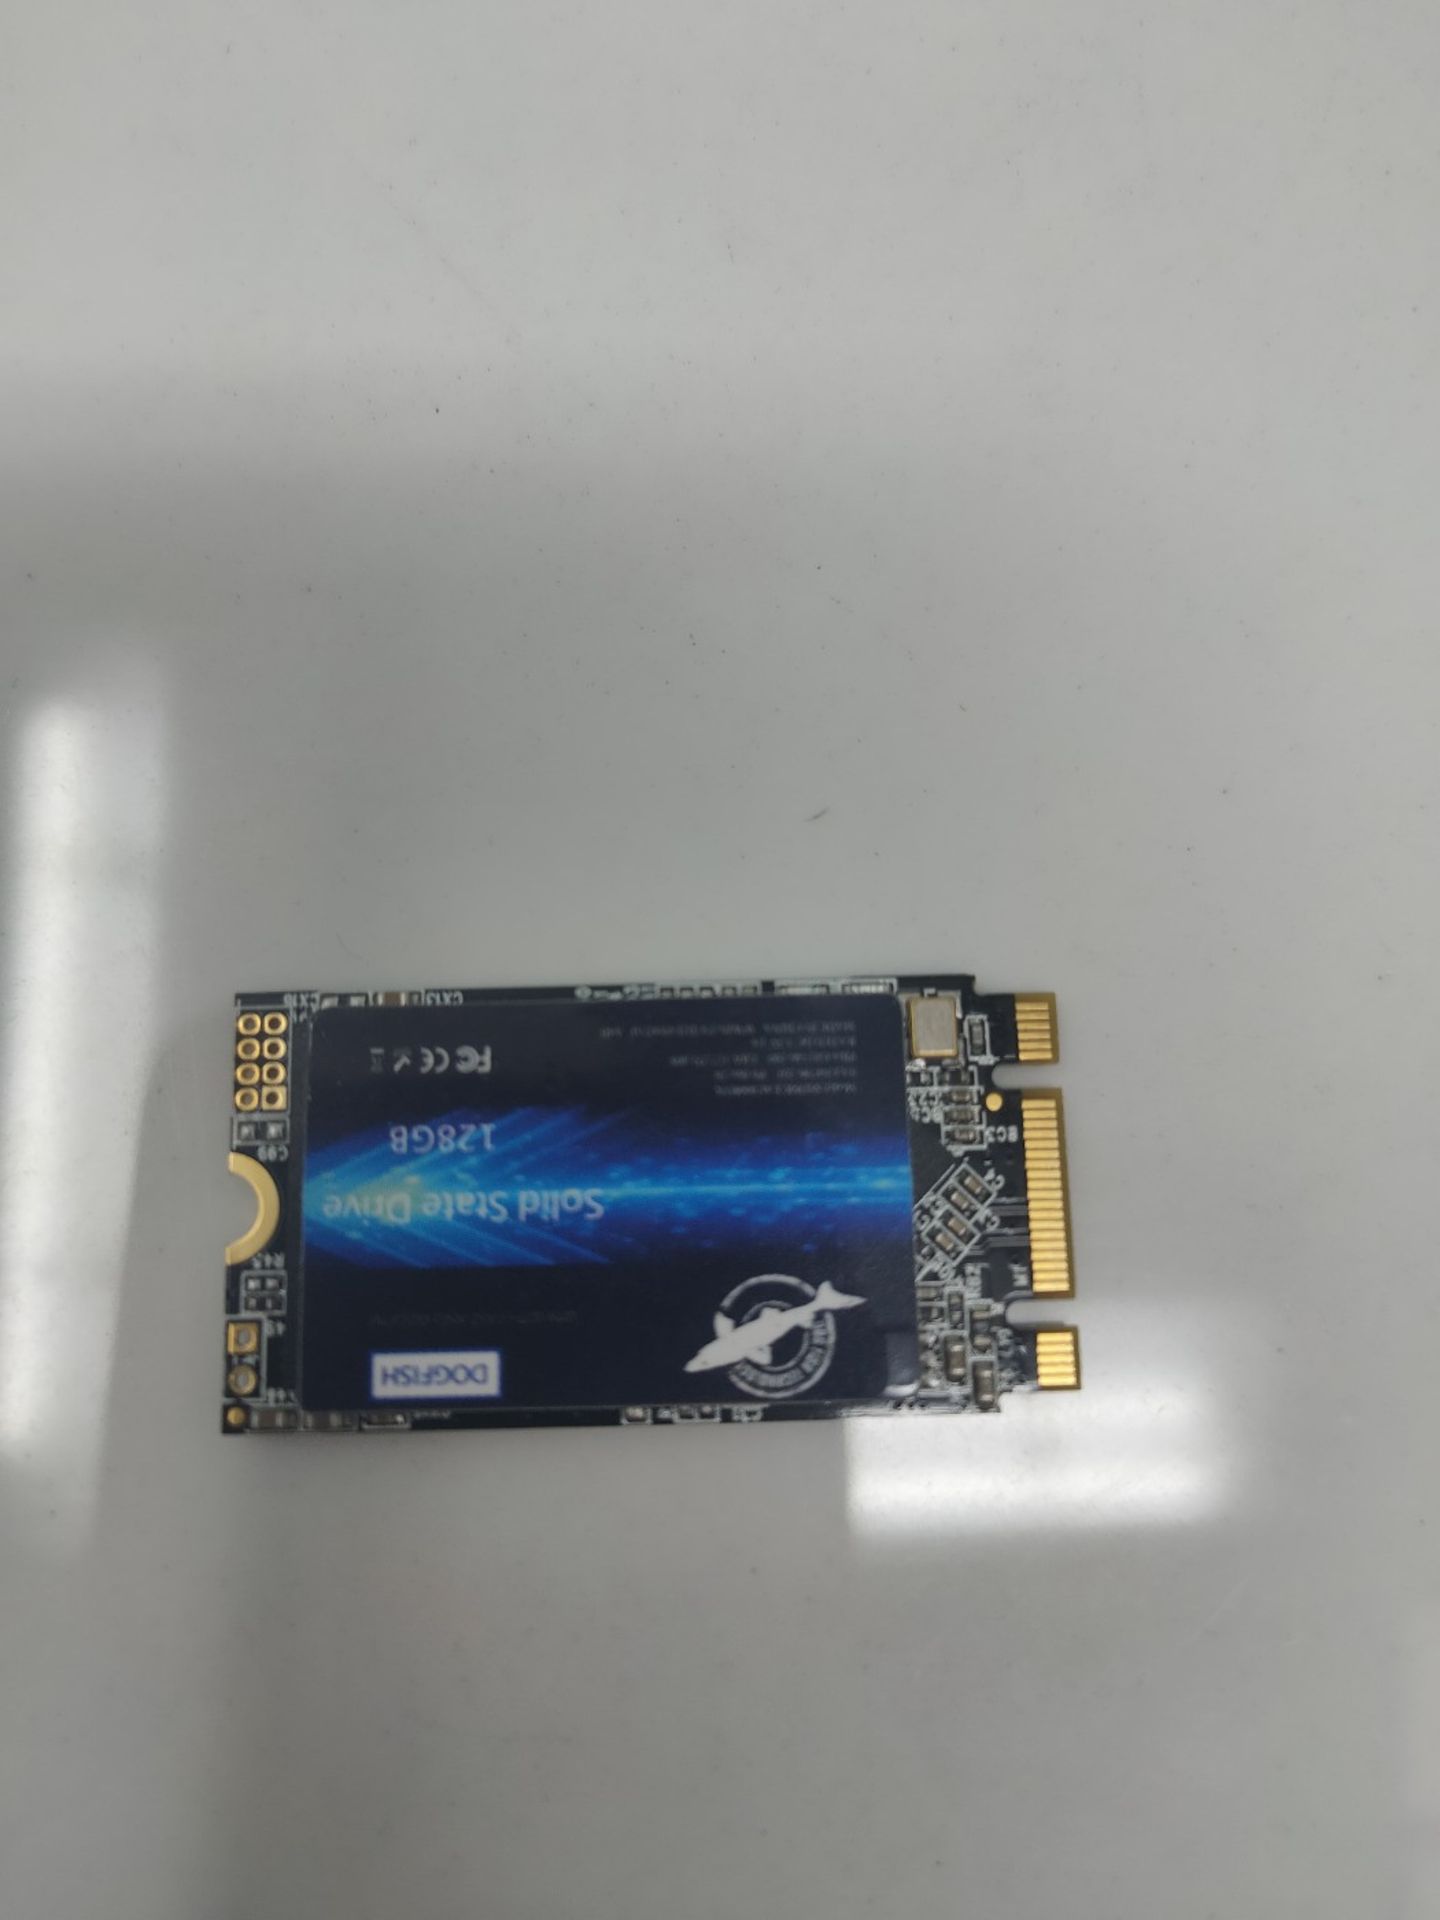 Dogfish SSD M.2 2242 128GB Ngff Internal Solid State Drive High Performance Hard Drive - Image 3 of 3